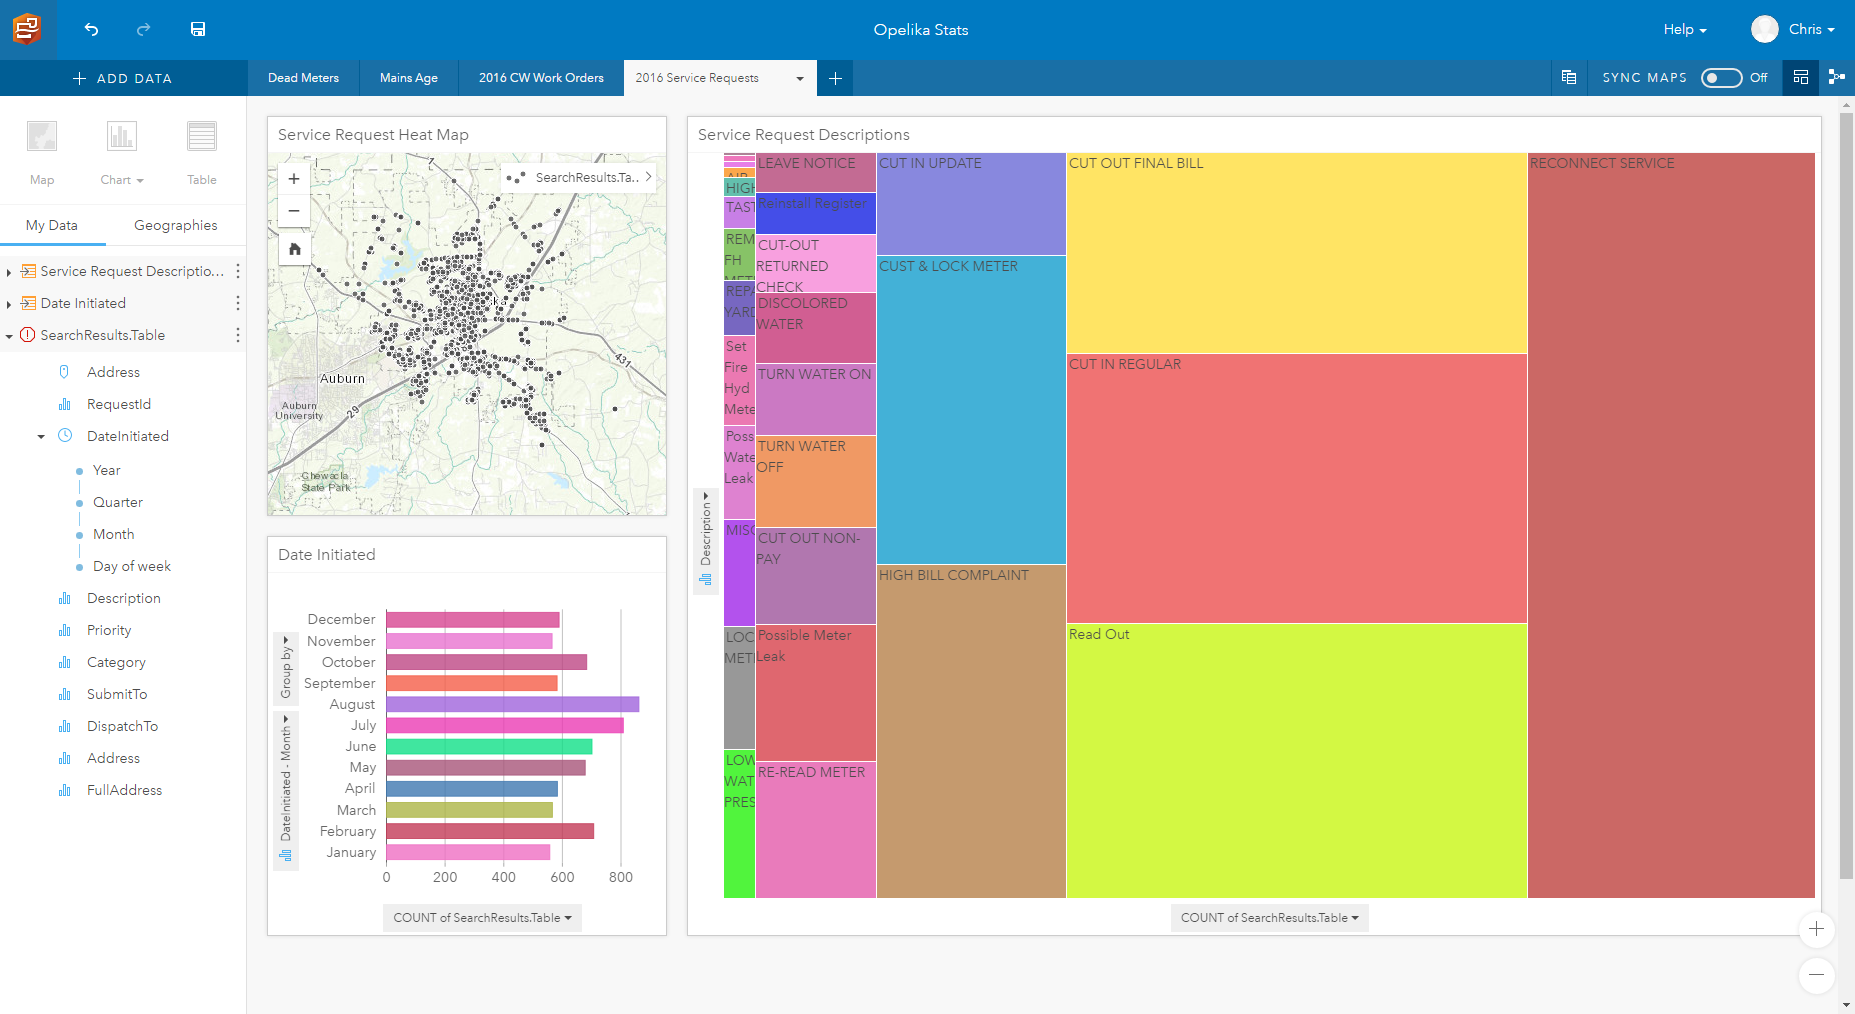 Opelika Utilities - Dead Meter Solutions, Powered by Insights for ArcGIS